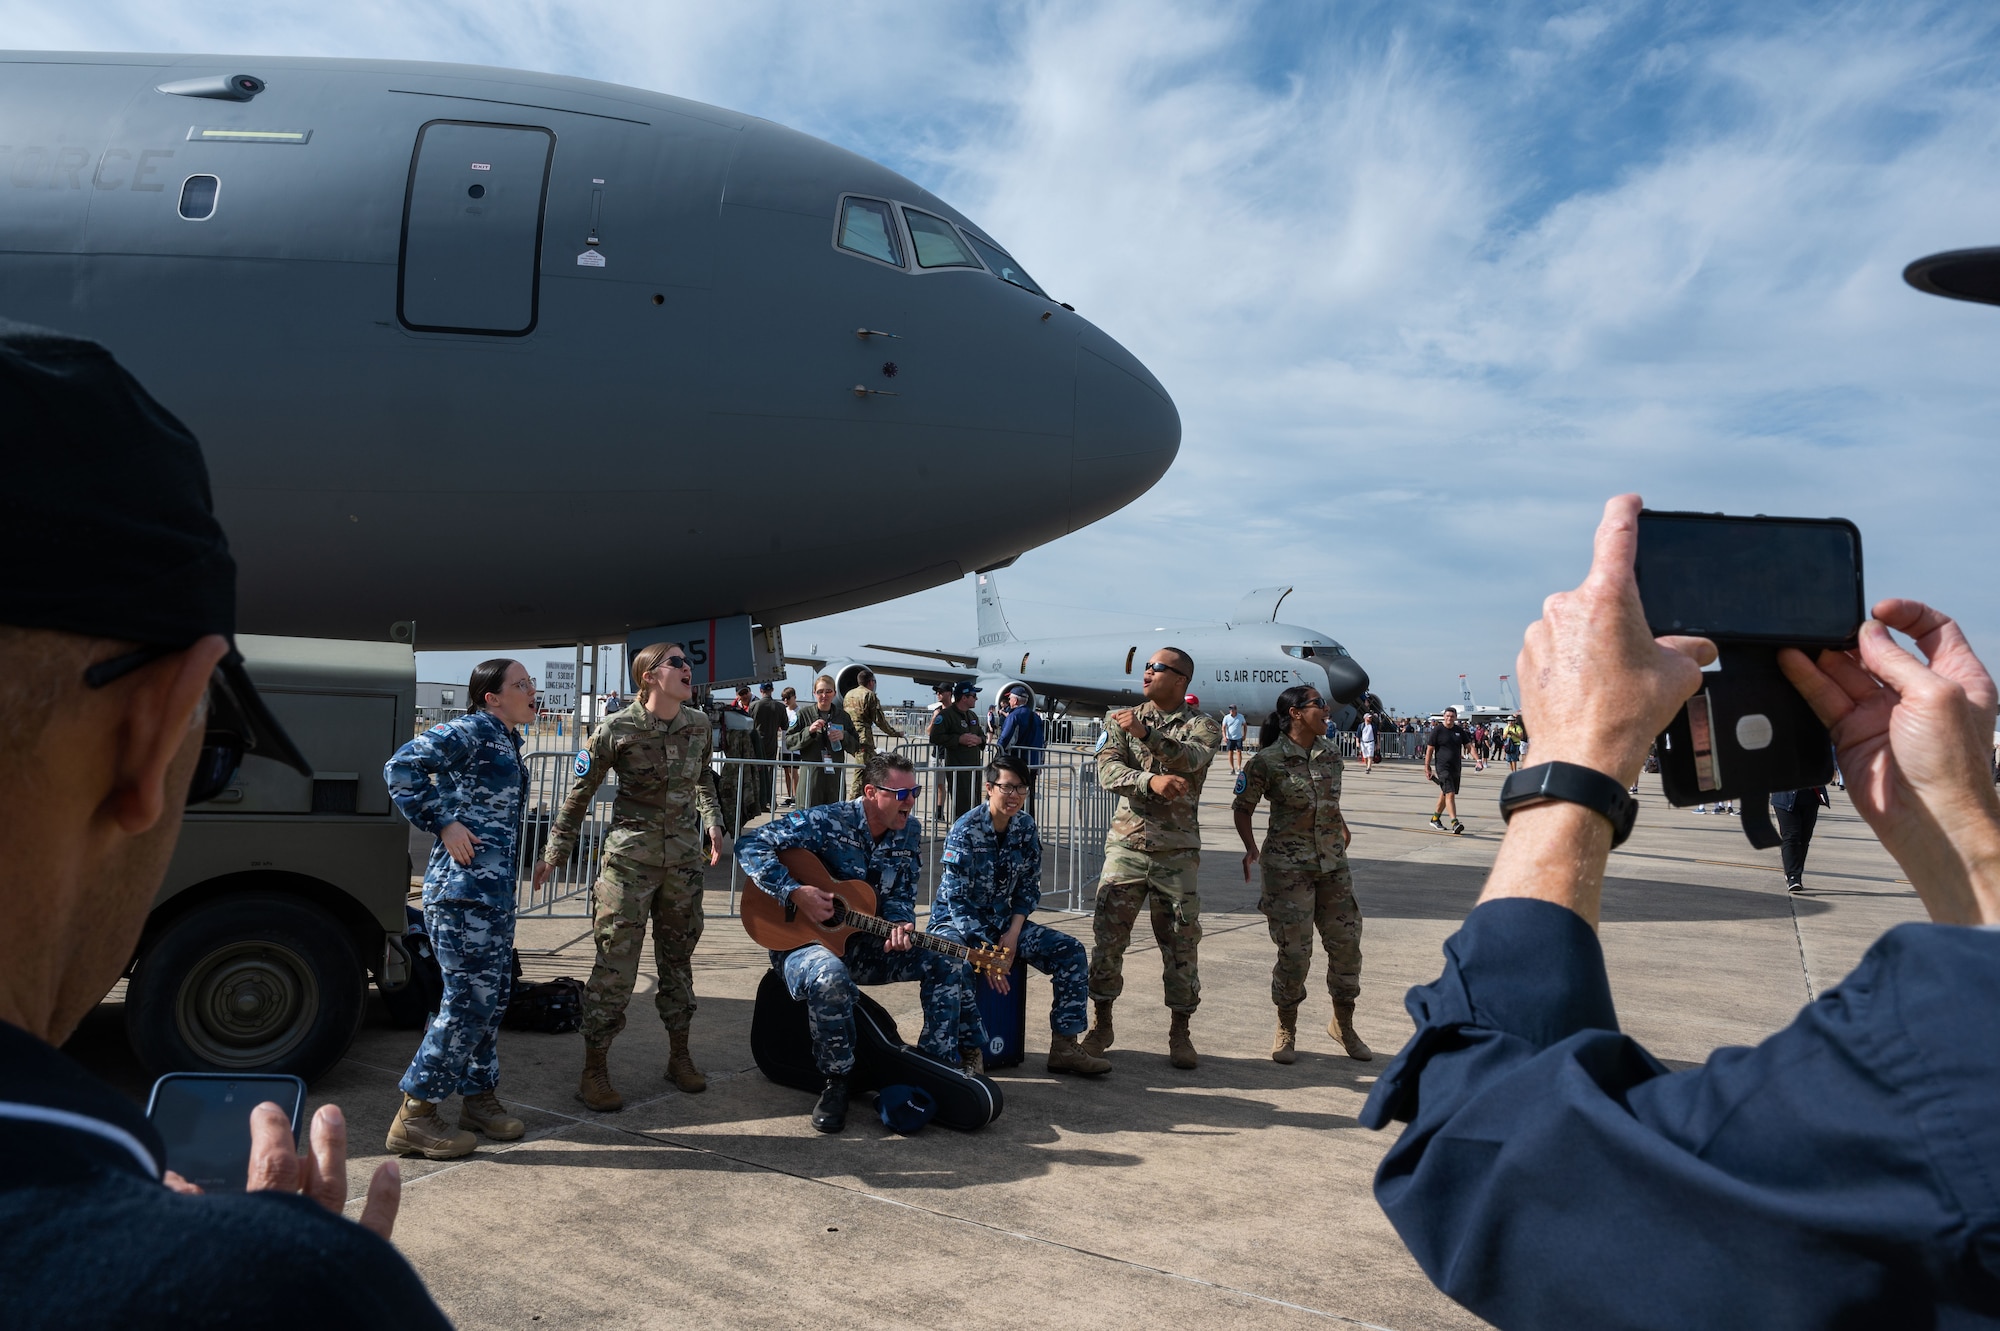 The U.S. Air Force Band of the Pacific-Hawaii performs a song in front of the KC-46 Pegasus static display at the 2023 Australian International Airshow and Aerospace & Defence Exposition—AVALON 23—at Avalon International Airport, March 4, 2023. Our steadfast relationship with Australia, deeply rooted in our common principles and shared values, stems from working together day in and day out across the full spectrum of operations and will continue to prosper as we further integrate our efforts through events such as AVALON 23. Through the power and energy of music, the Band of the Pacific’s impressive performances create engaging moments that serve as a demonstration of the excellence displayed by the 46,000 Airmen serving, stationed and deployed throughout the Indo-Pacific. (U.S. Air Force photo by Tech. Sgt. Hailey Haux)